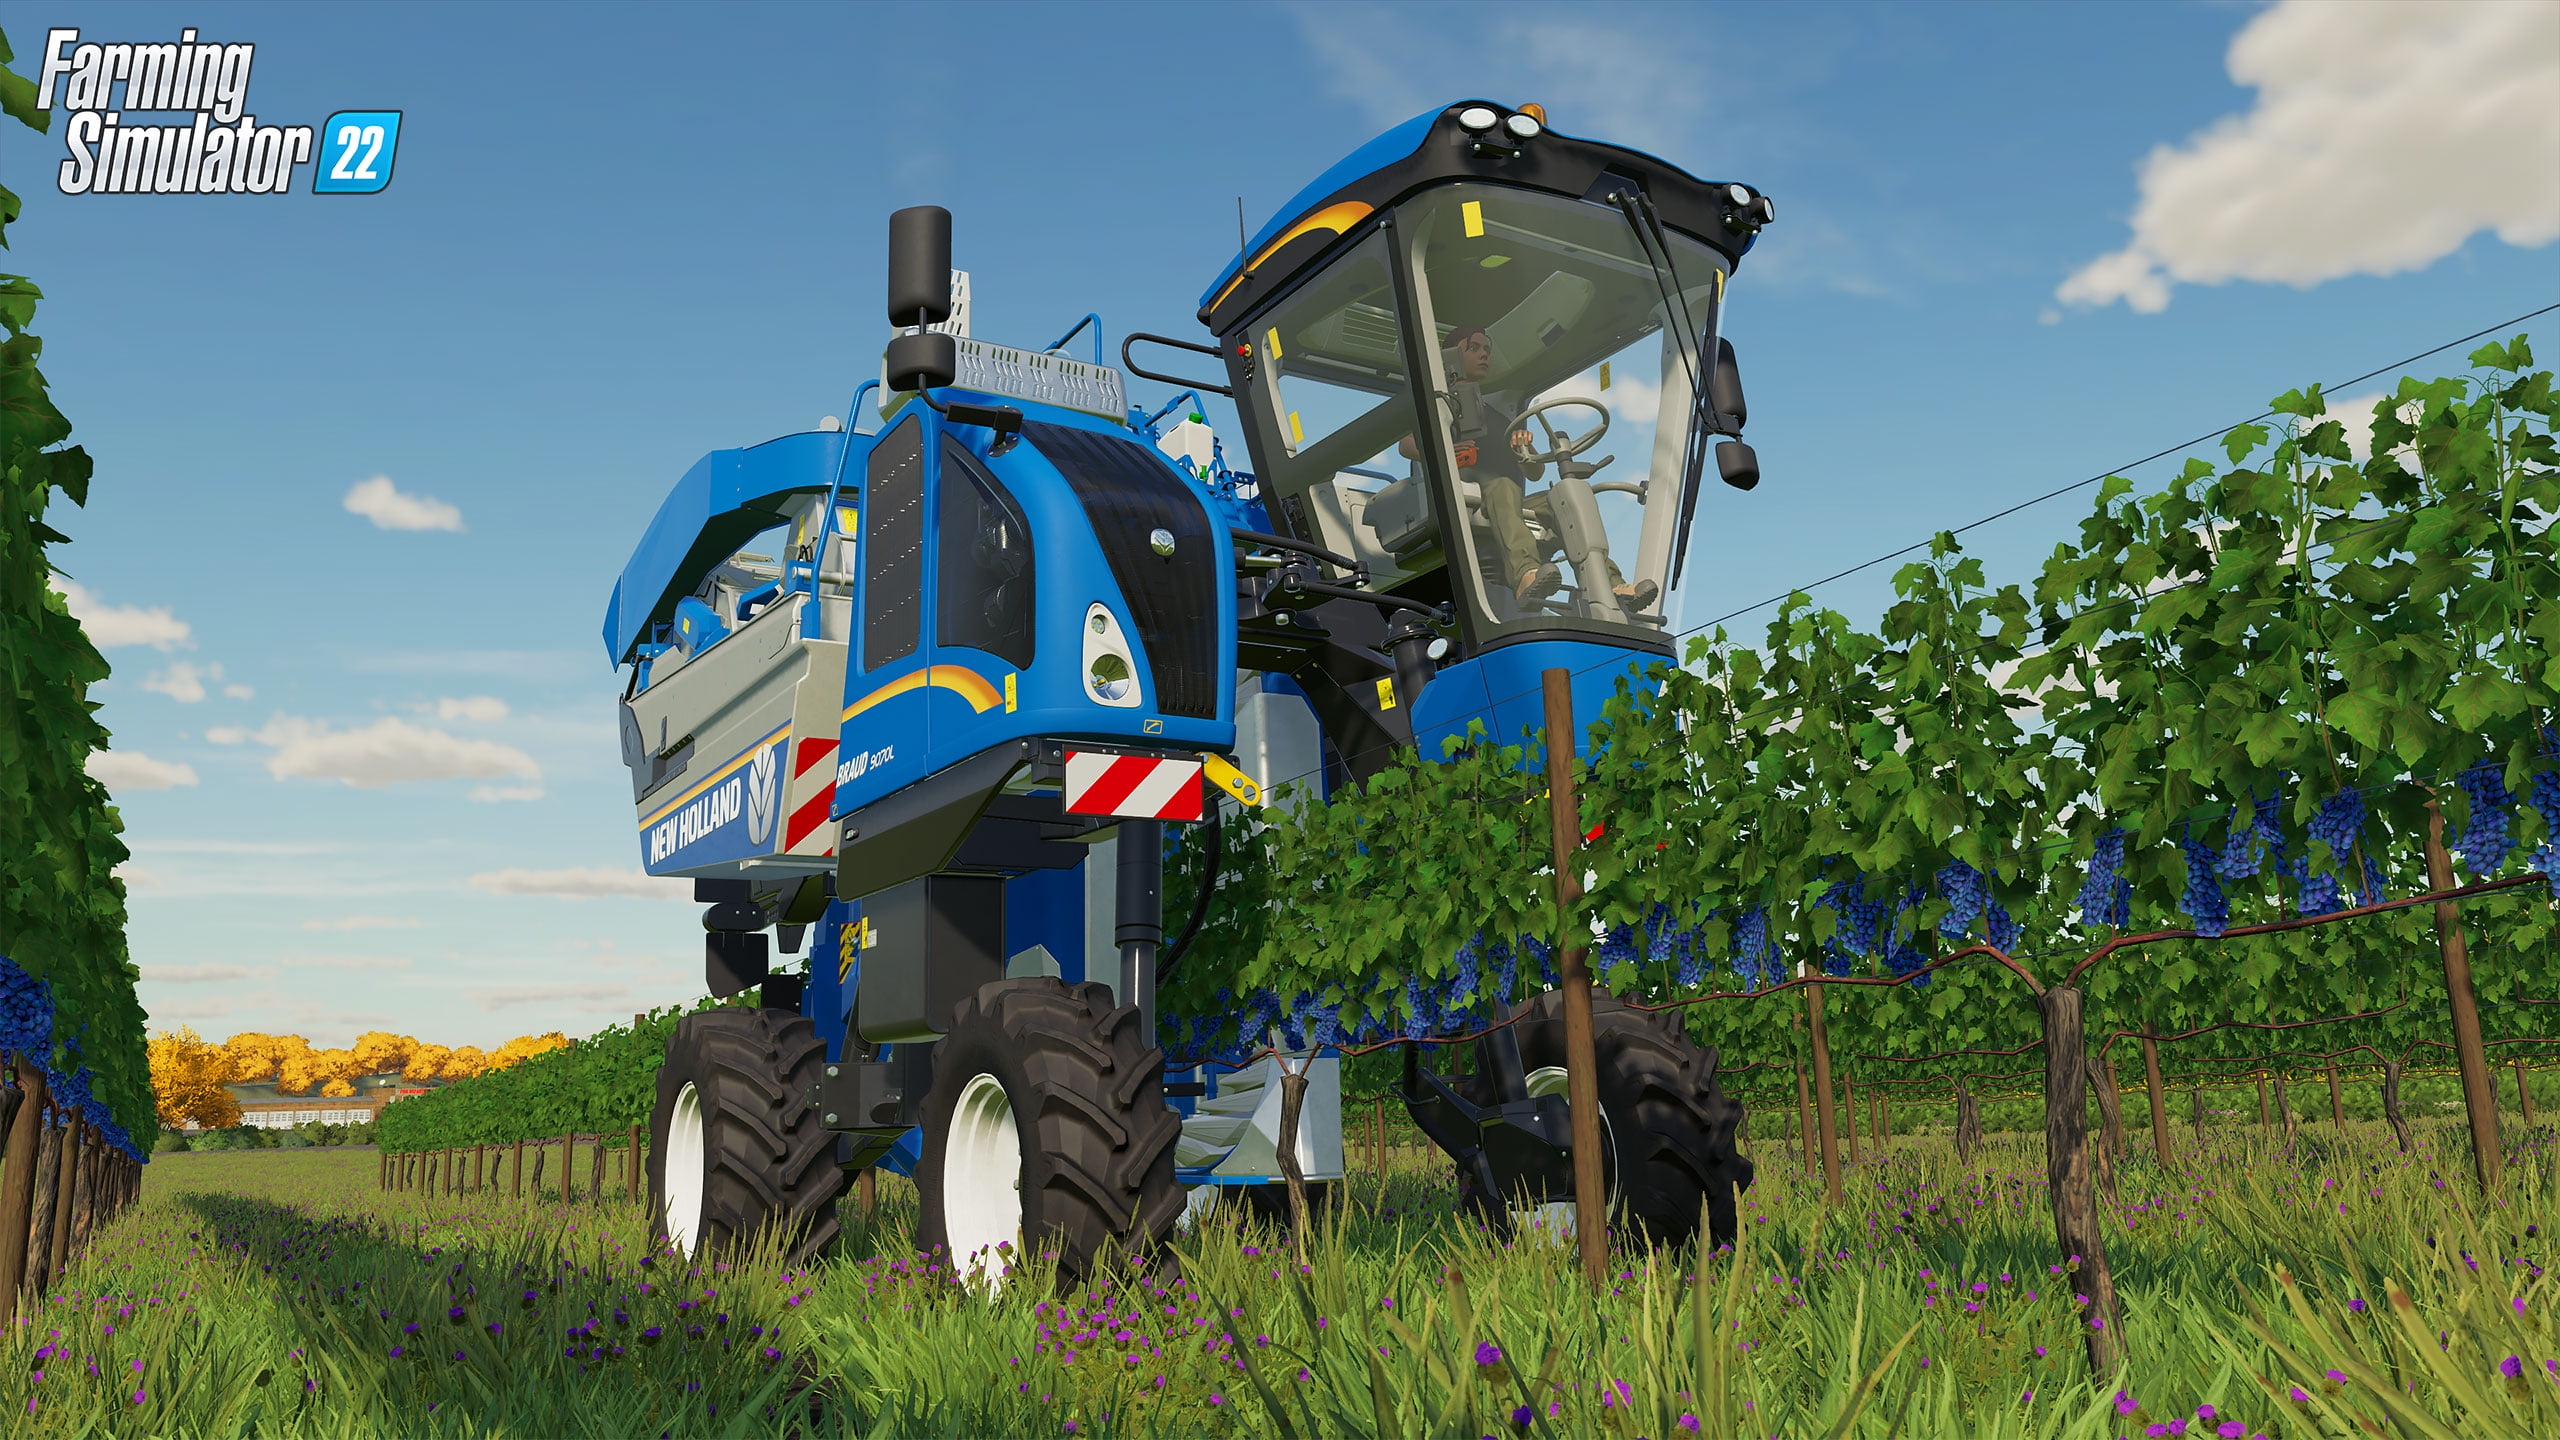 Buy Farming Simulator 22 from the Humble Store